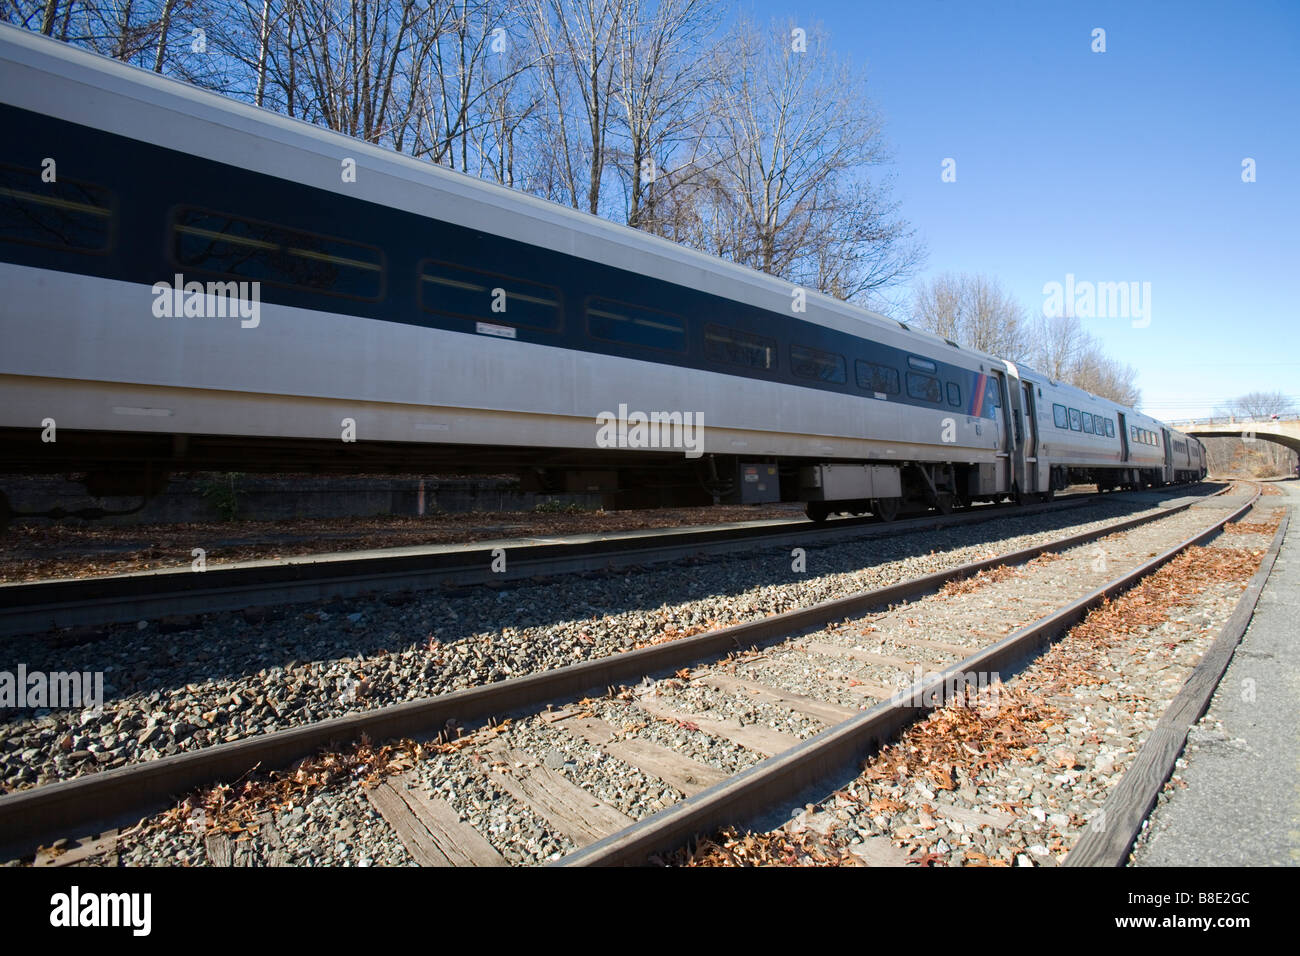 A passenger train and passenger cars in transit. Stock Photo